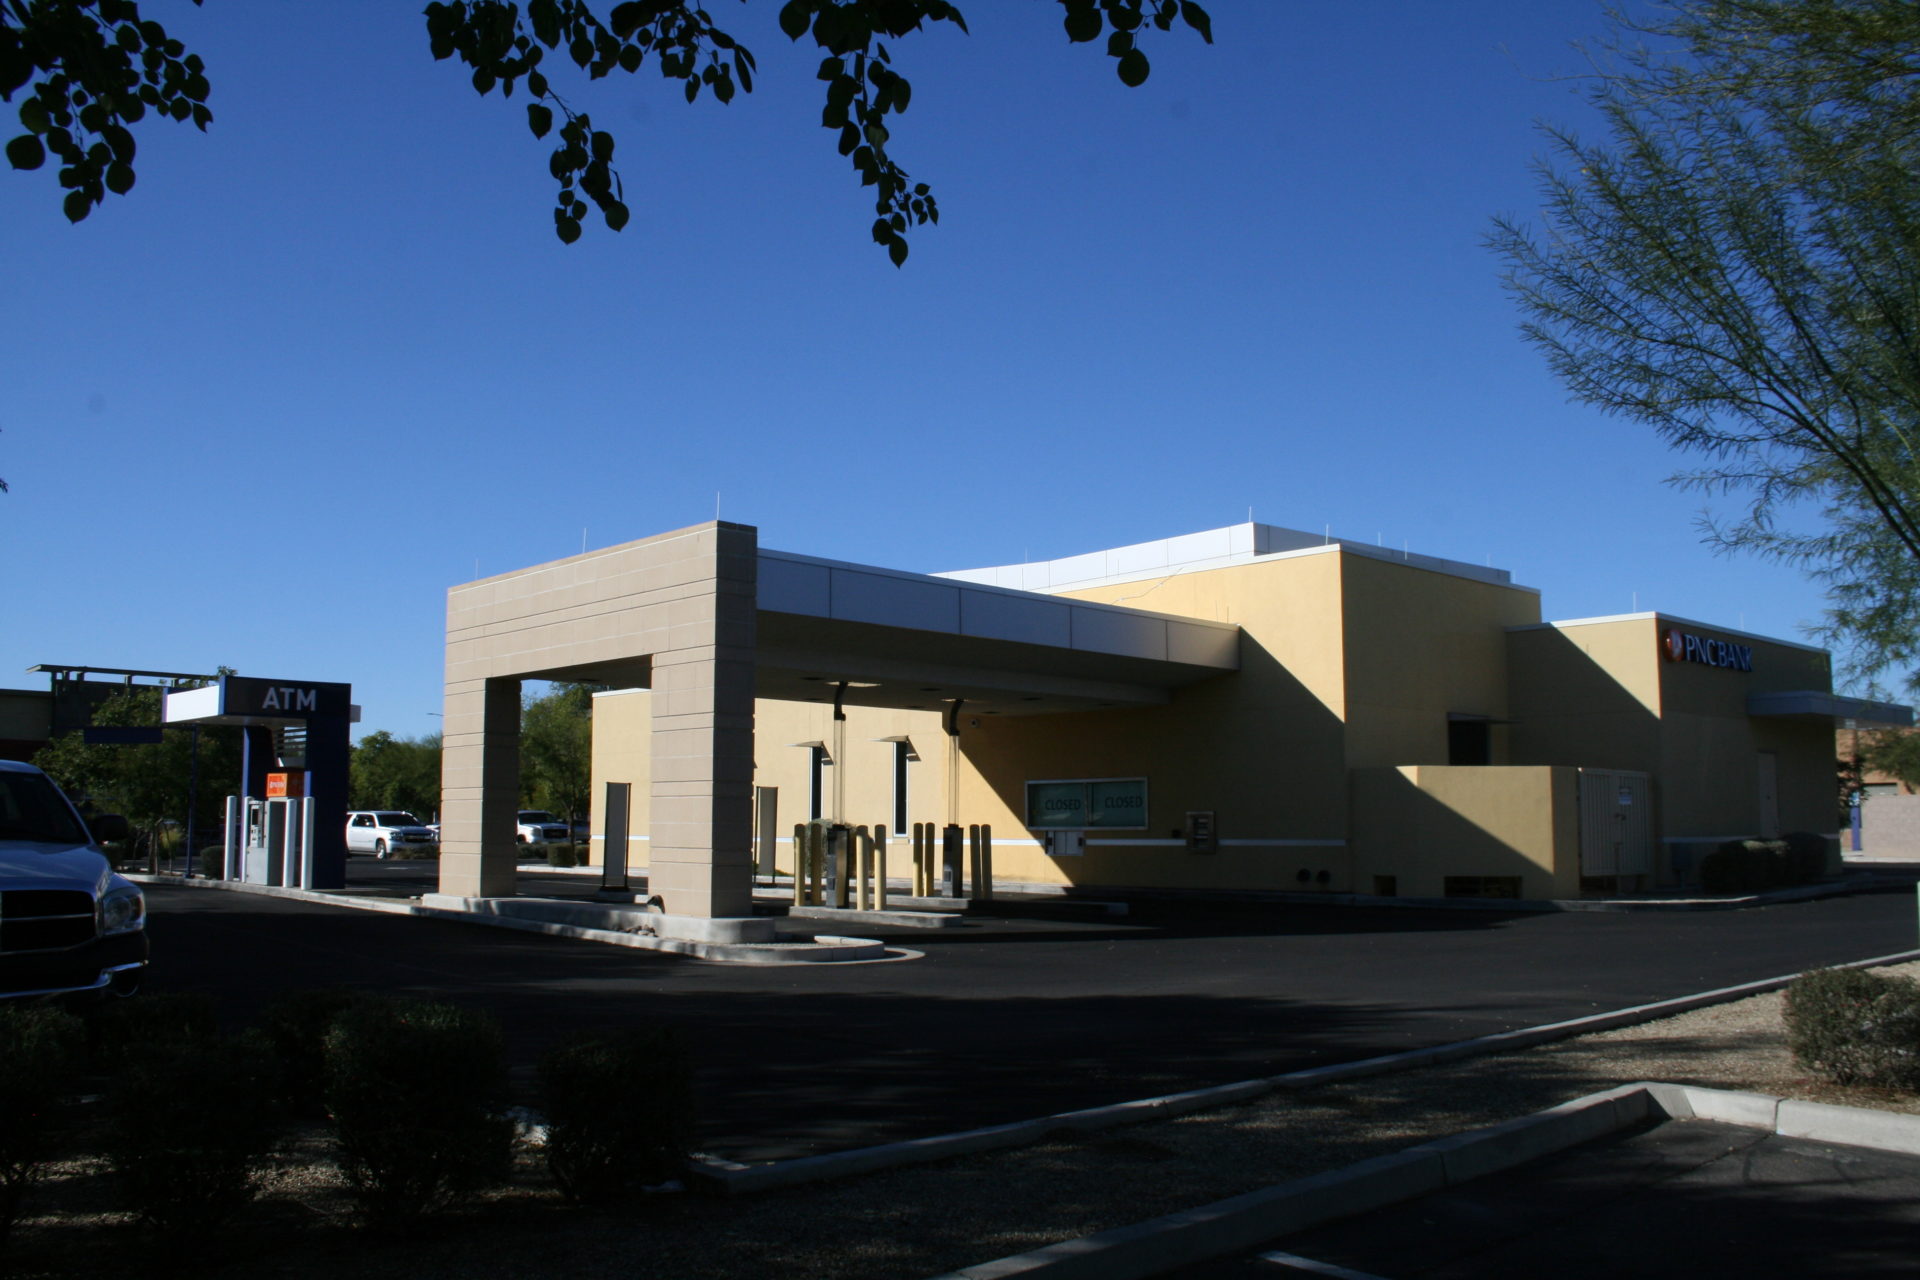 A building with a large entrance and a parking lot.